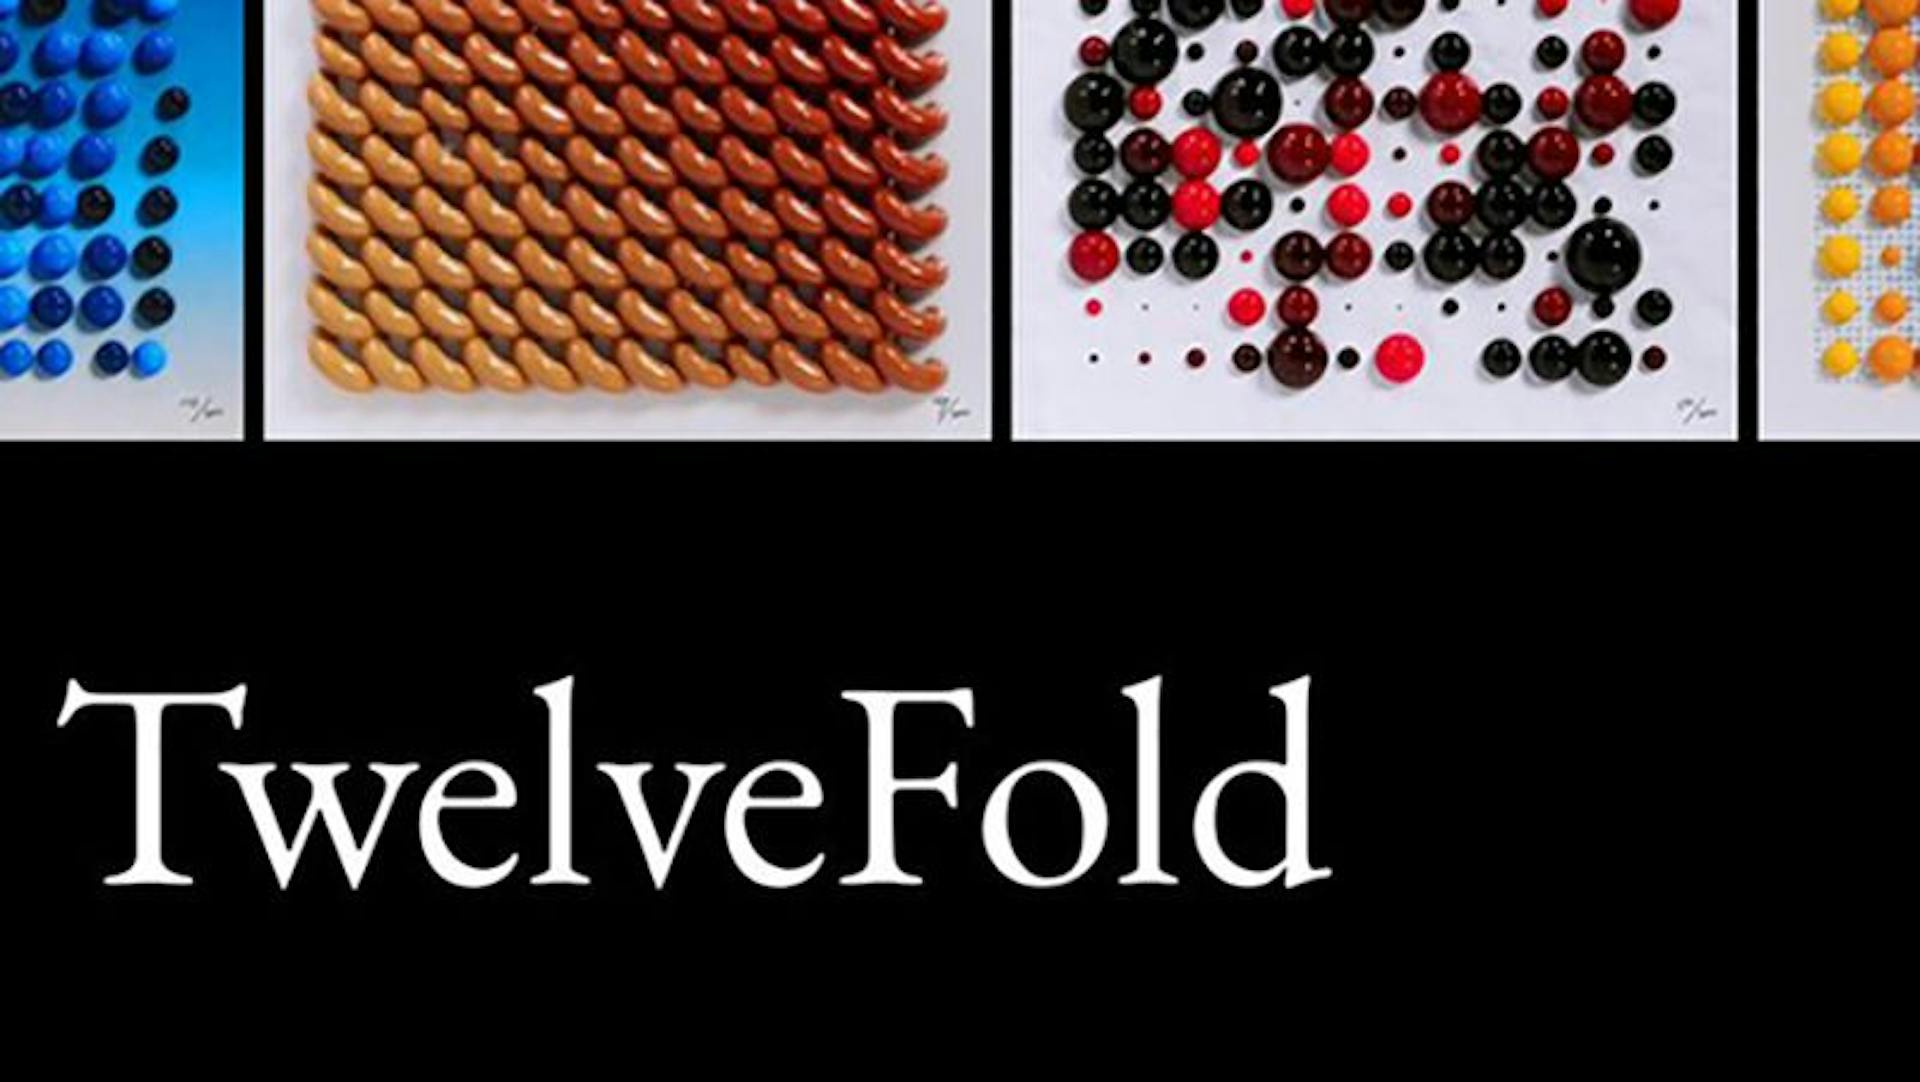 TwelveFold. A limited edition collection of 300 generative pieces inscribed on satoshis on the Bitcoin blockchain.